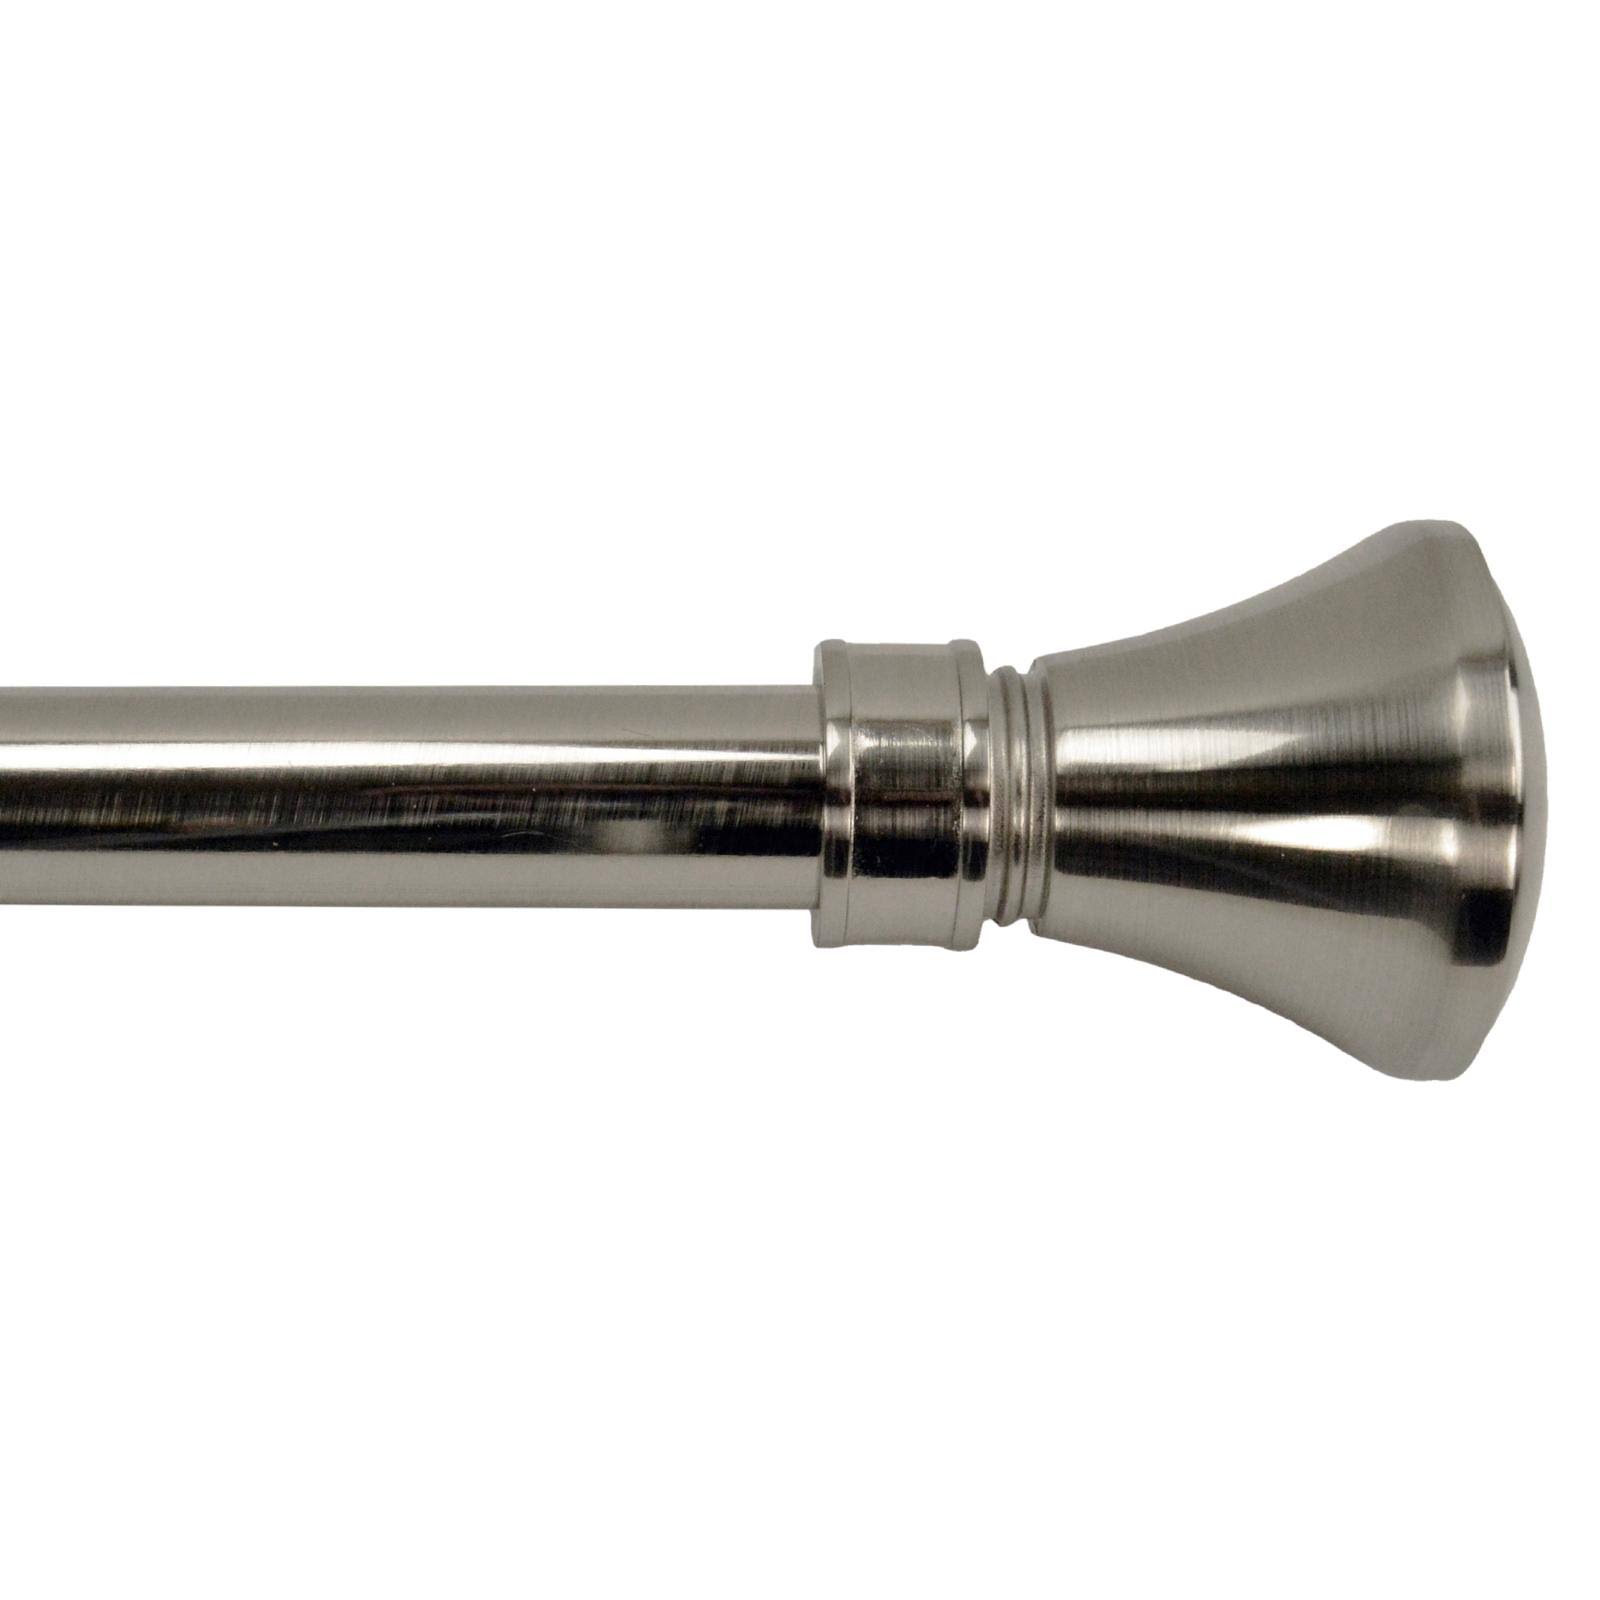 Versailles Home Fashions 86-144-in Lexington Rod with Flare Finial - Pewter/Silver LX0986-50